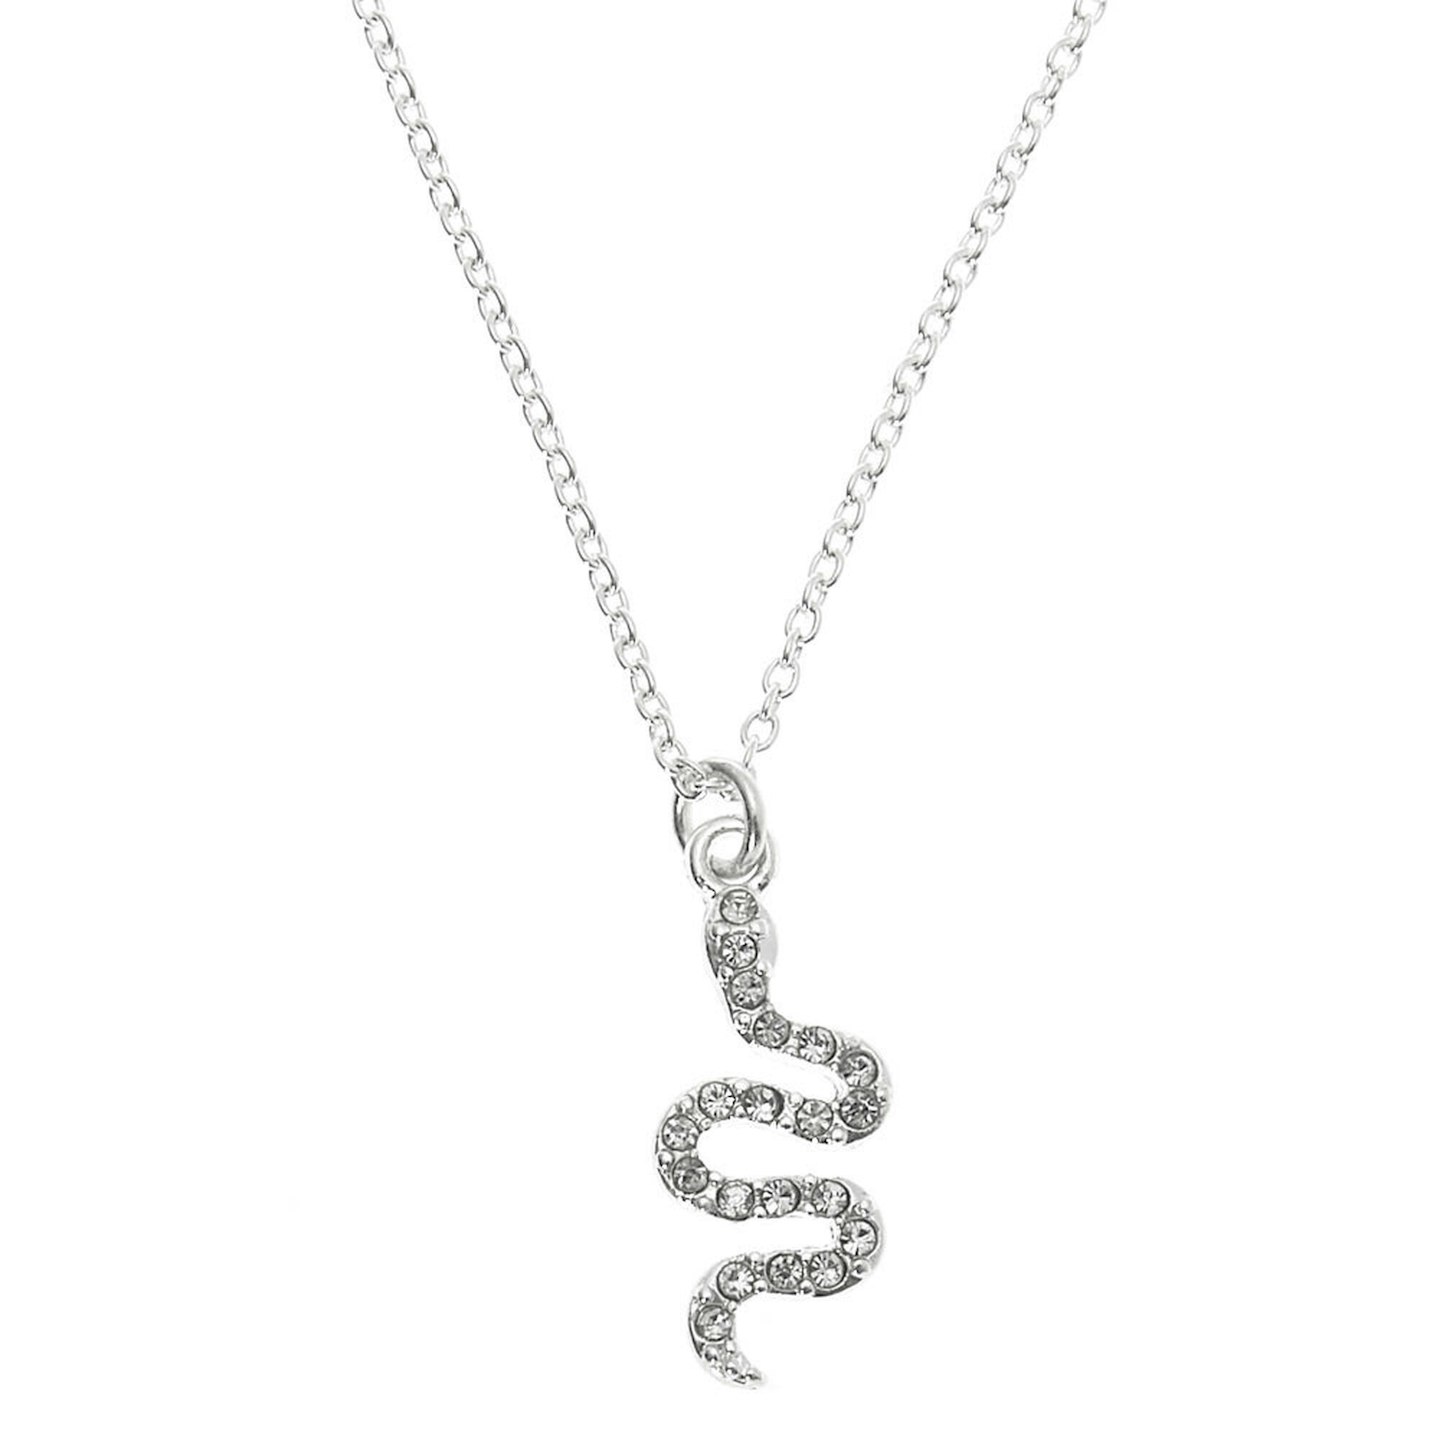 Claire's Silver-tone Embellished Snake Pendant Necklace